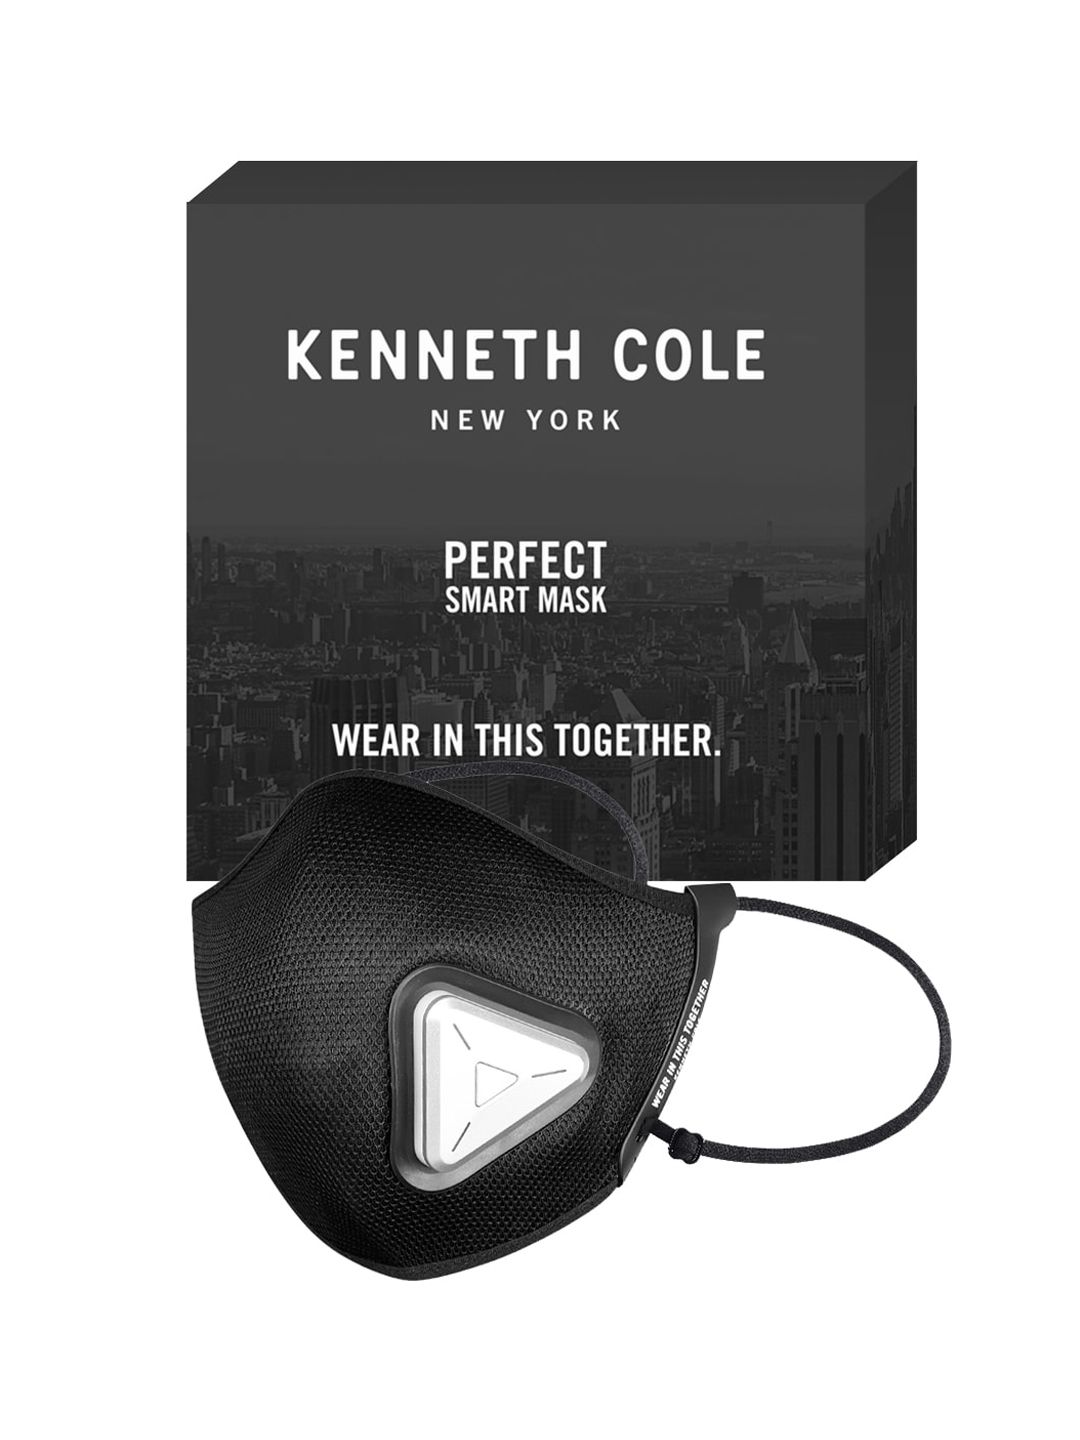 Kenneth Cole Unisex Black 6-Ply Reusable Portable Air-Purifying Outdoor Mask With Filter Price in India